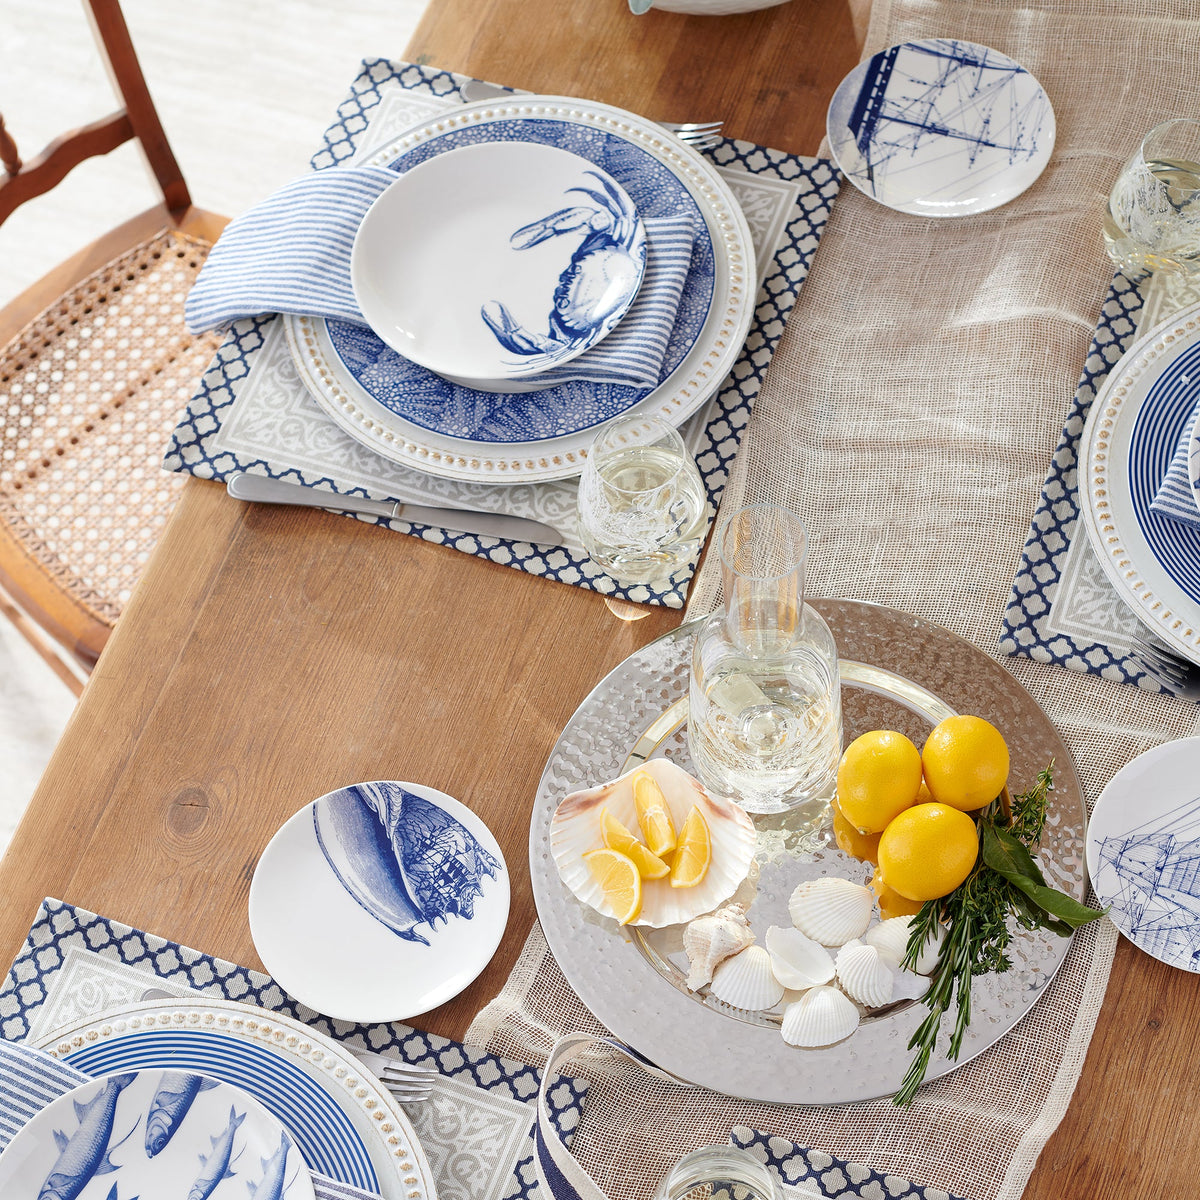 A nautical heritage-inspired table setting with blue and white Rigging Canapé Plates, adorned with vintage illustrations of lemons by Caskata Artisanal Home.